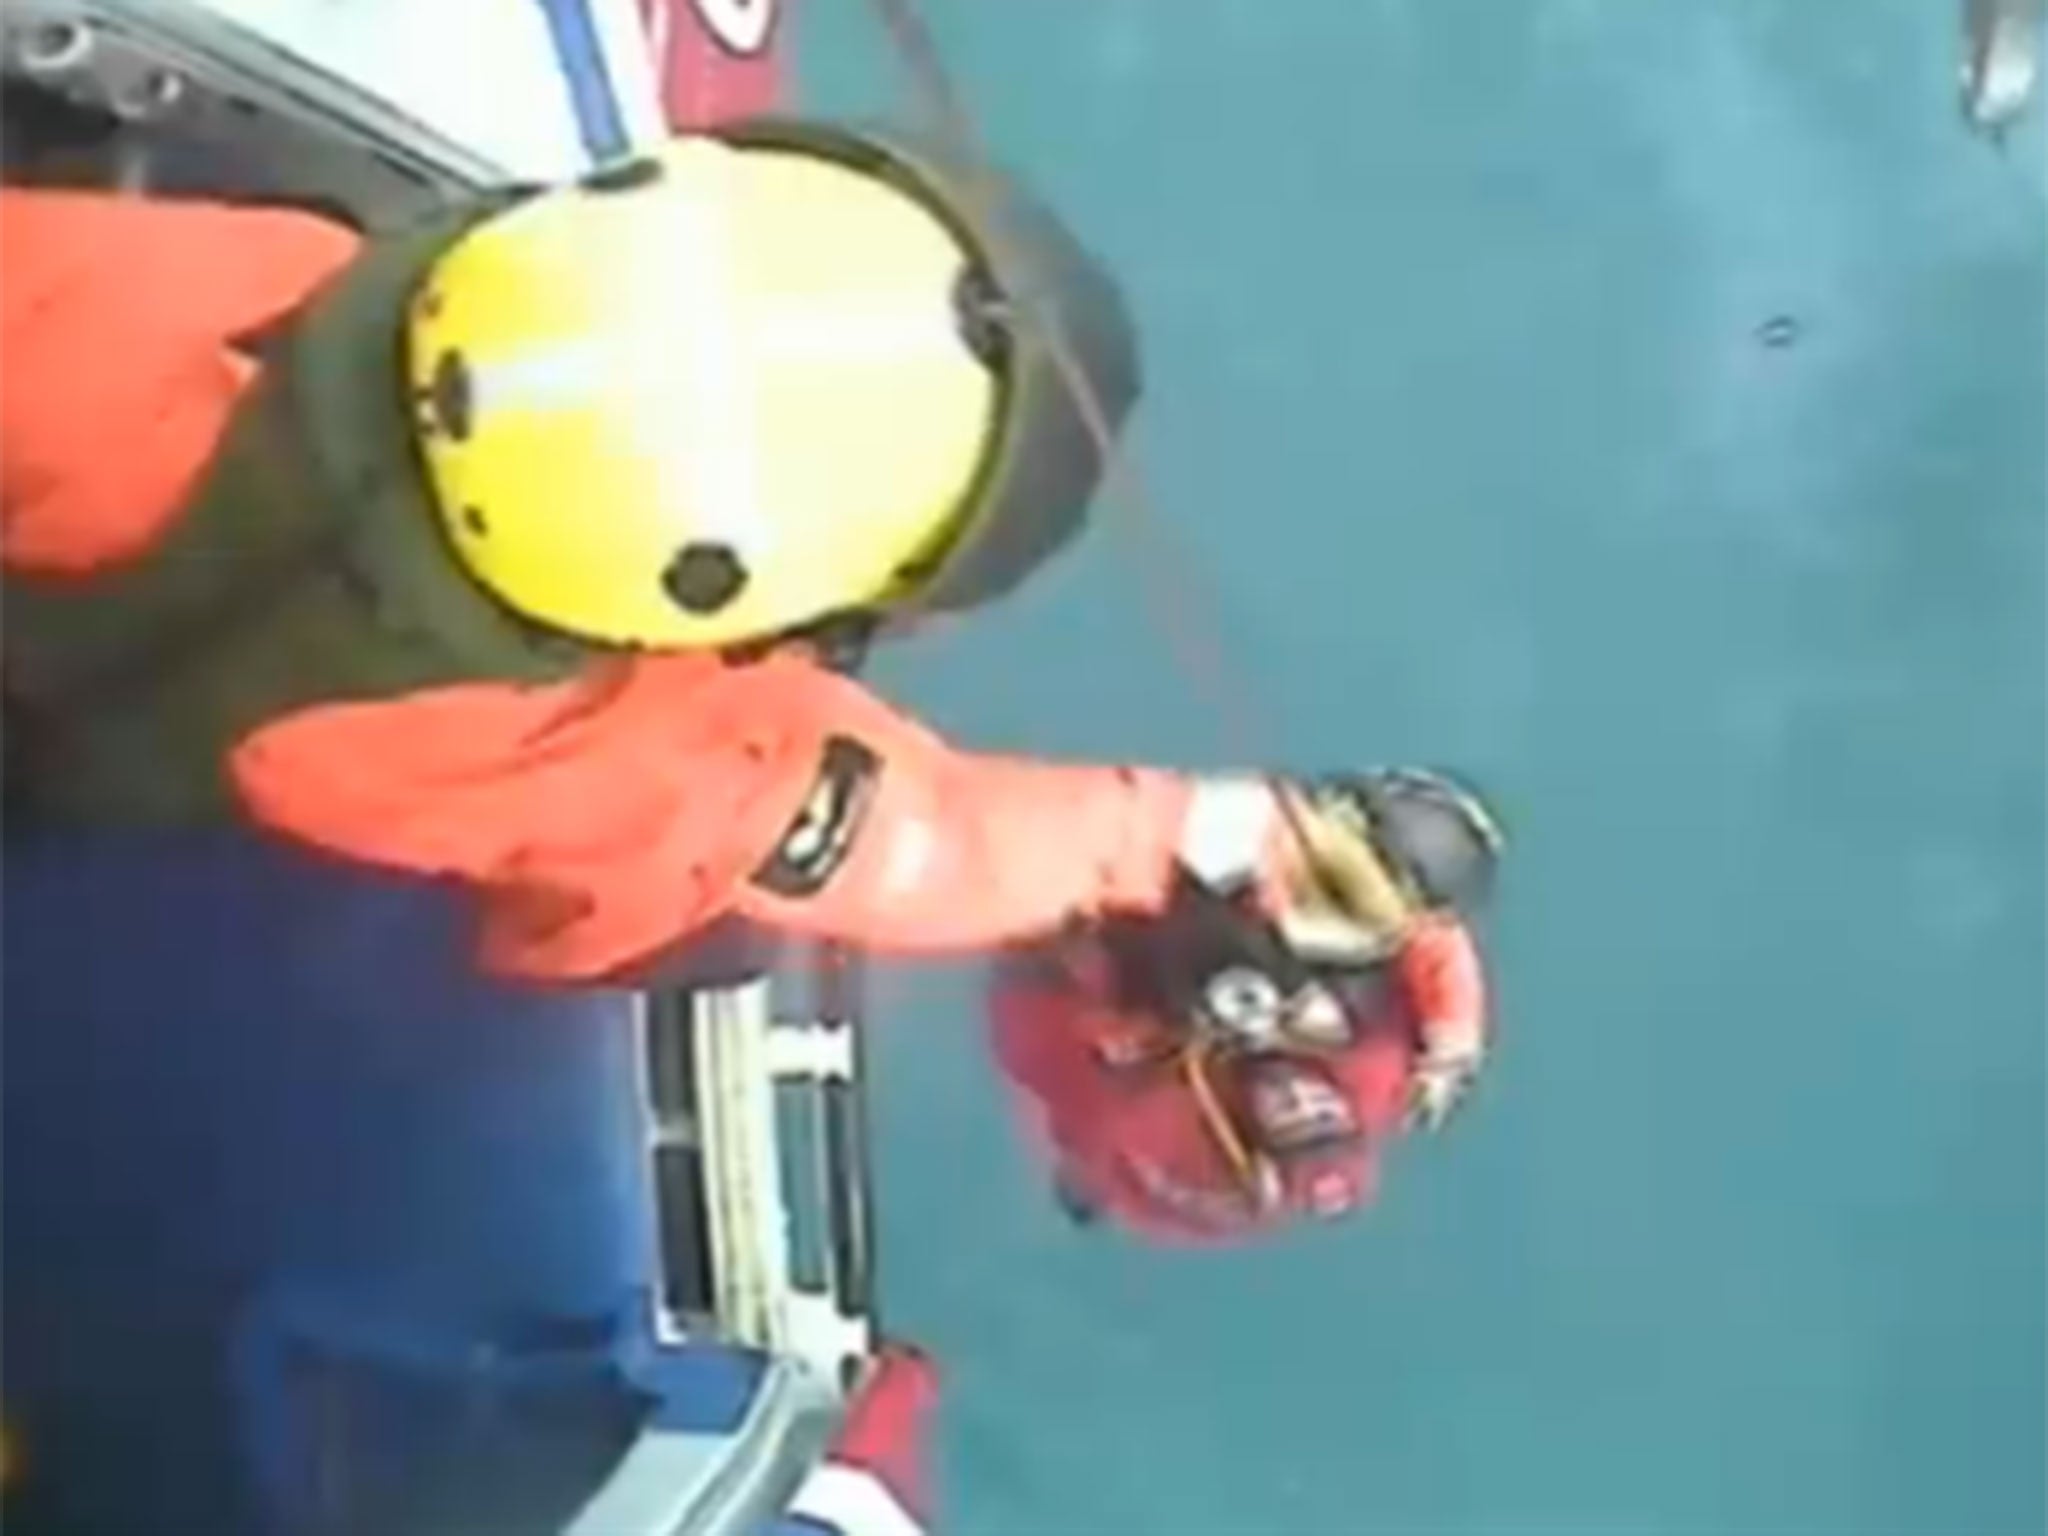 11 of the 22 crew members were winched to safety by Greek Air Force helicopter